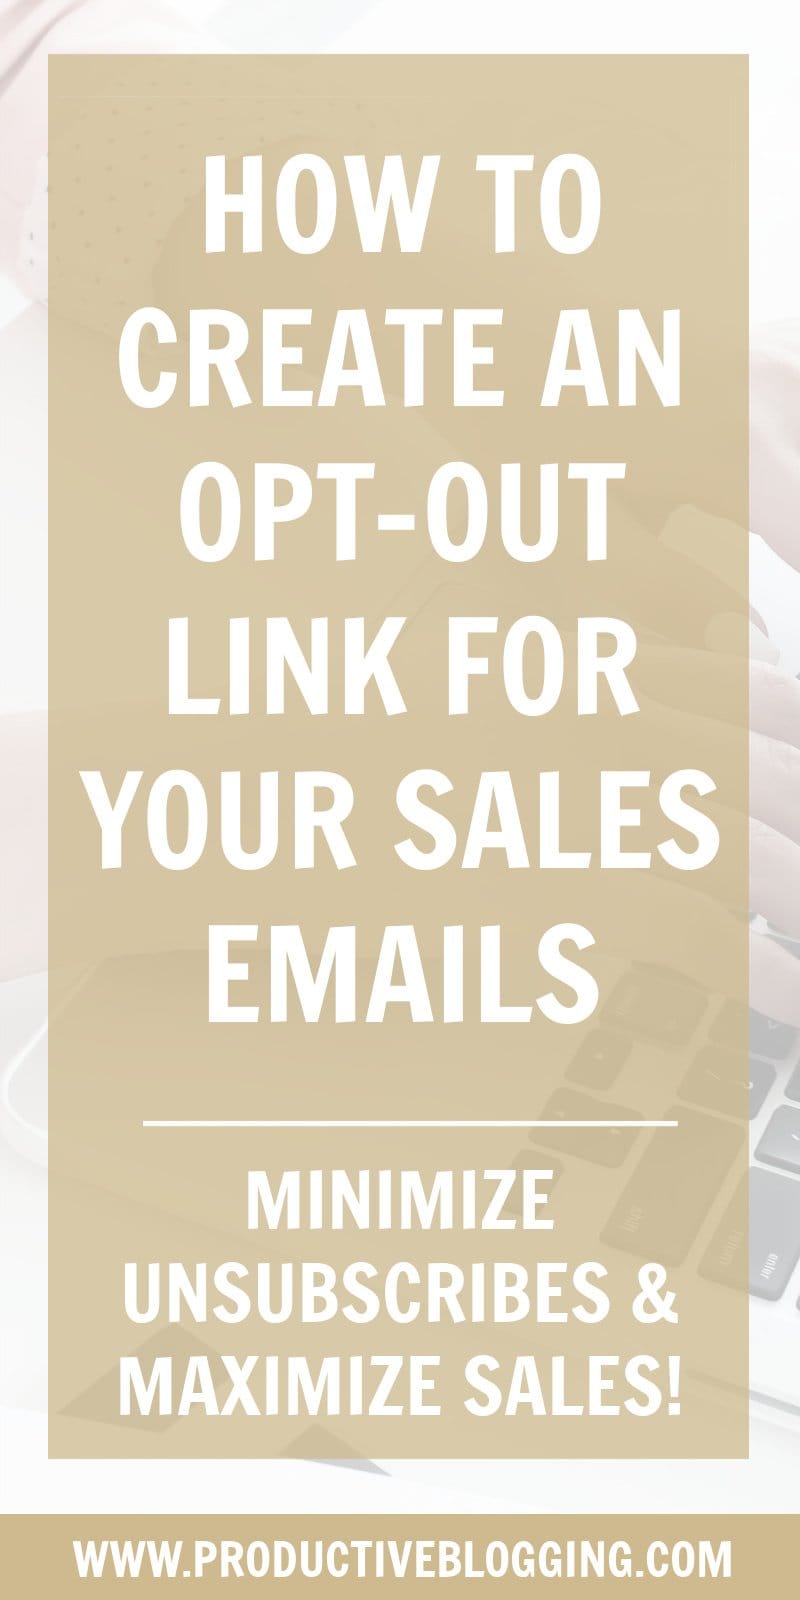 Want to allow subscribers to opt-out of sales emails WITHOUT unsubscribing completely from your email list? It’s really easy – here’s how… #optoutlink #emailsubscribers #emaillist #emailmarketing #salesemails #convertkit #blog #blogging #blogger #bloggingtips #blogginglife #bloglife #bloggersofIG #professionalblogger #bloggingismyjob #solopreneur #mompreneur #fempreneur #contentmarketing #bloggingbiz #productivitytips #blogsmarternotharder #productiveblogging